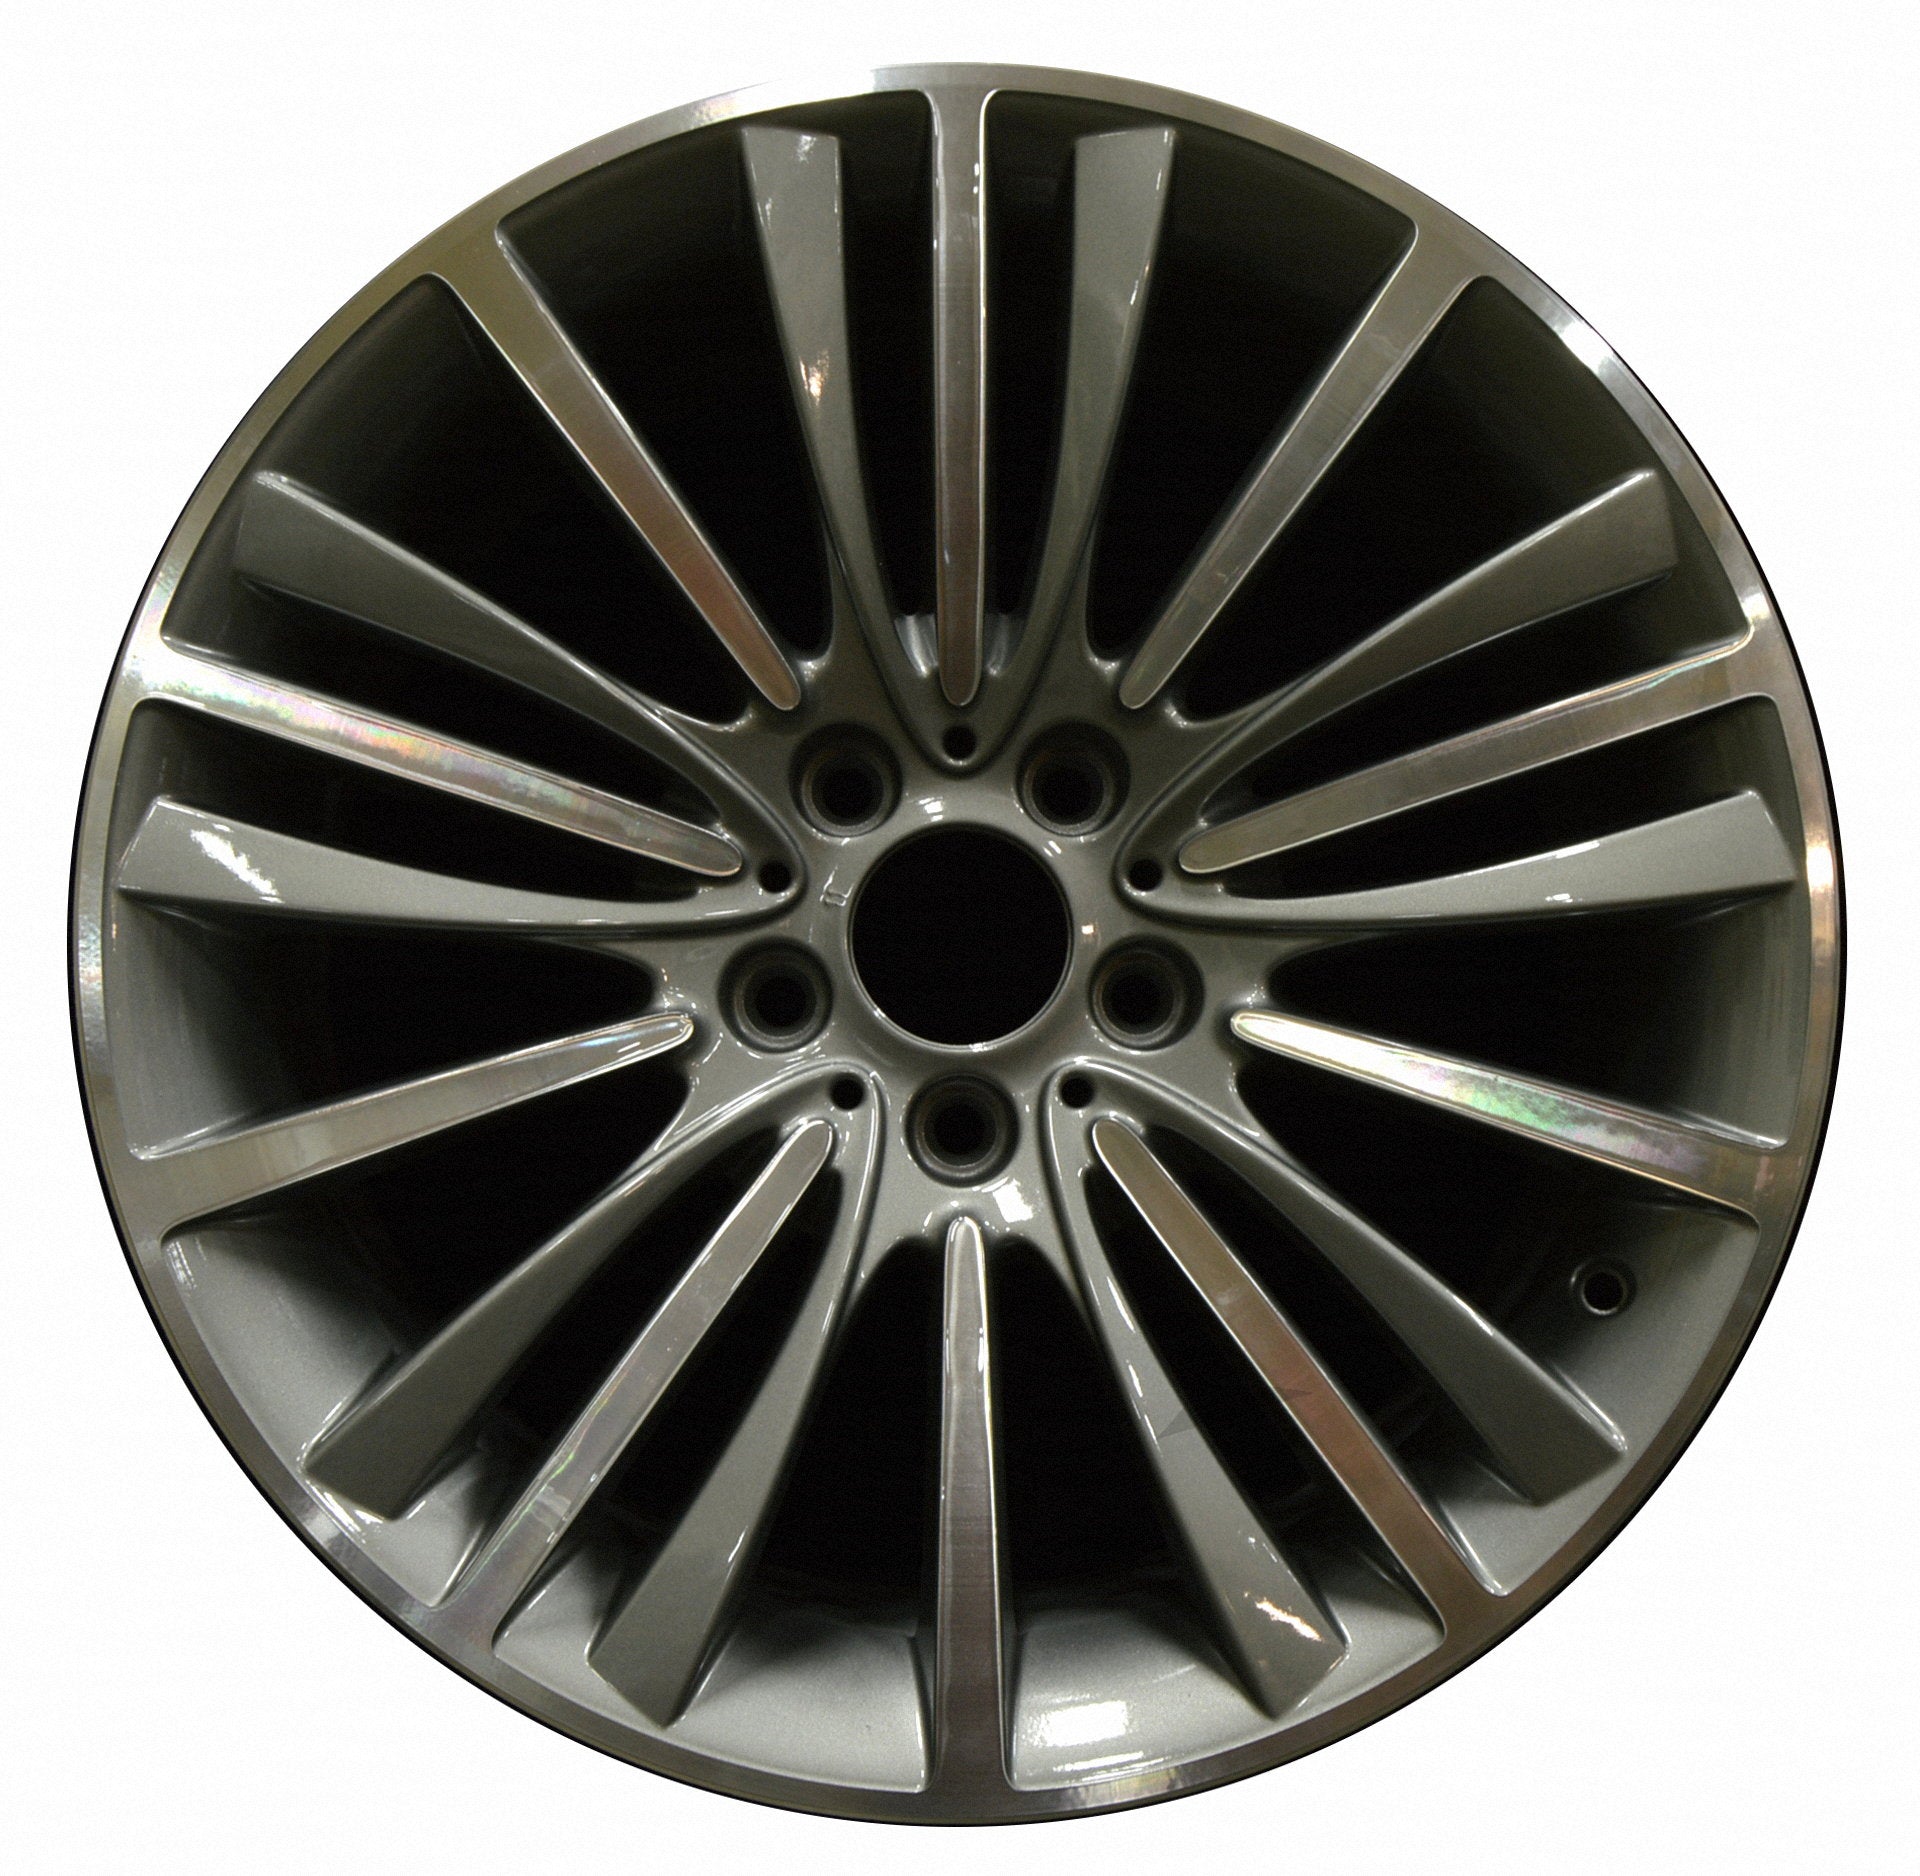 BMW 535i  2011, 2012, 2013, 2014, 2015, 2016 Factory OEM Car Wheel Size 19x8.5 Alloy WAO.71582FT.LC09.MABRT